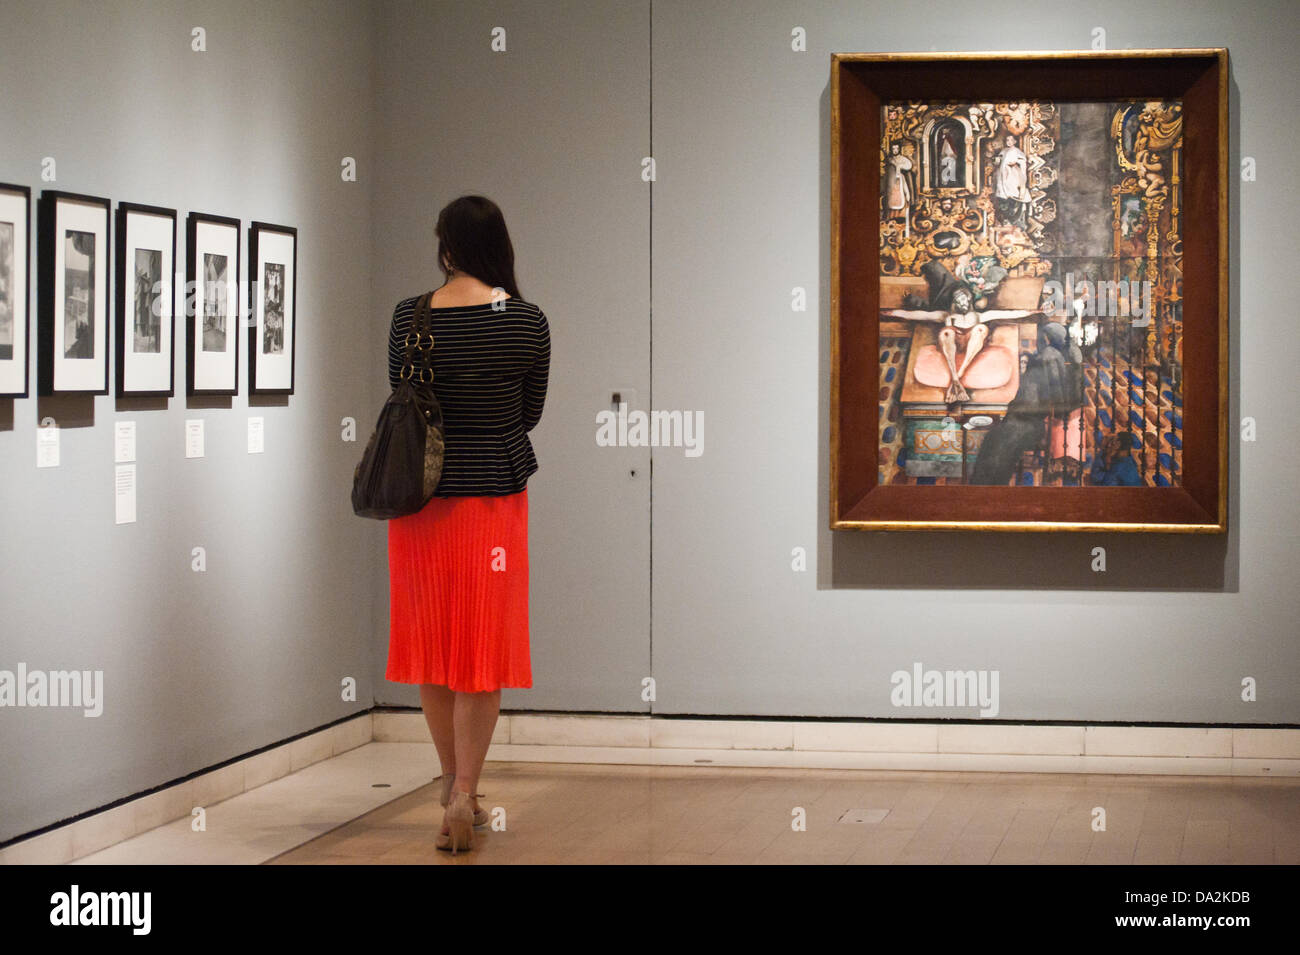 London, UK - 2 July 2013: a visitor stands next to a work by entitled at the exhibition 'Mexico: A Revolution  London, UK - 2 July 2013: A woman walks next to a work by Edward Burra entitled 'Mexican Church, 1938' at the exhibition 'Mexico: A Revolution in Art, 1910–1940' which opens on the 6th of July. The show features over 120 paintings and photographs and examines the intense period of artistic creativity that took place in Mexico at the beginning of the 20th century.   in Art, 1910–1940' which opens at the Royal Academy of Arts on the 6th of July.  Stock Photo